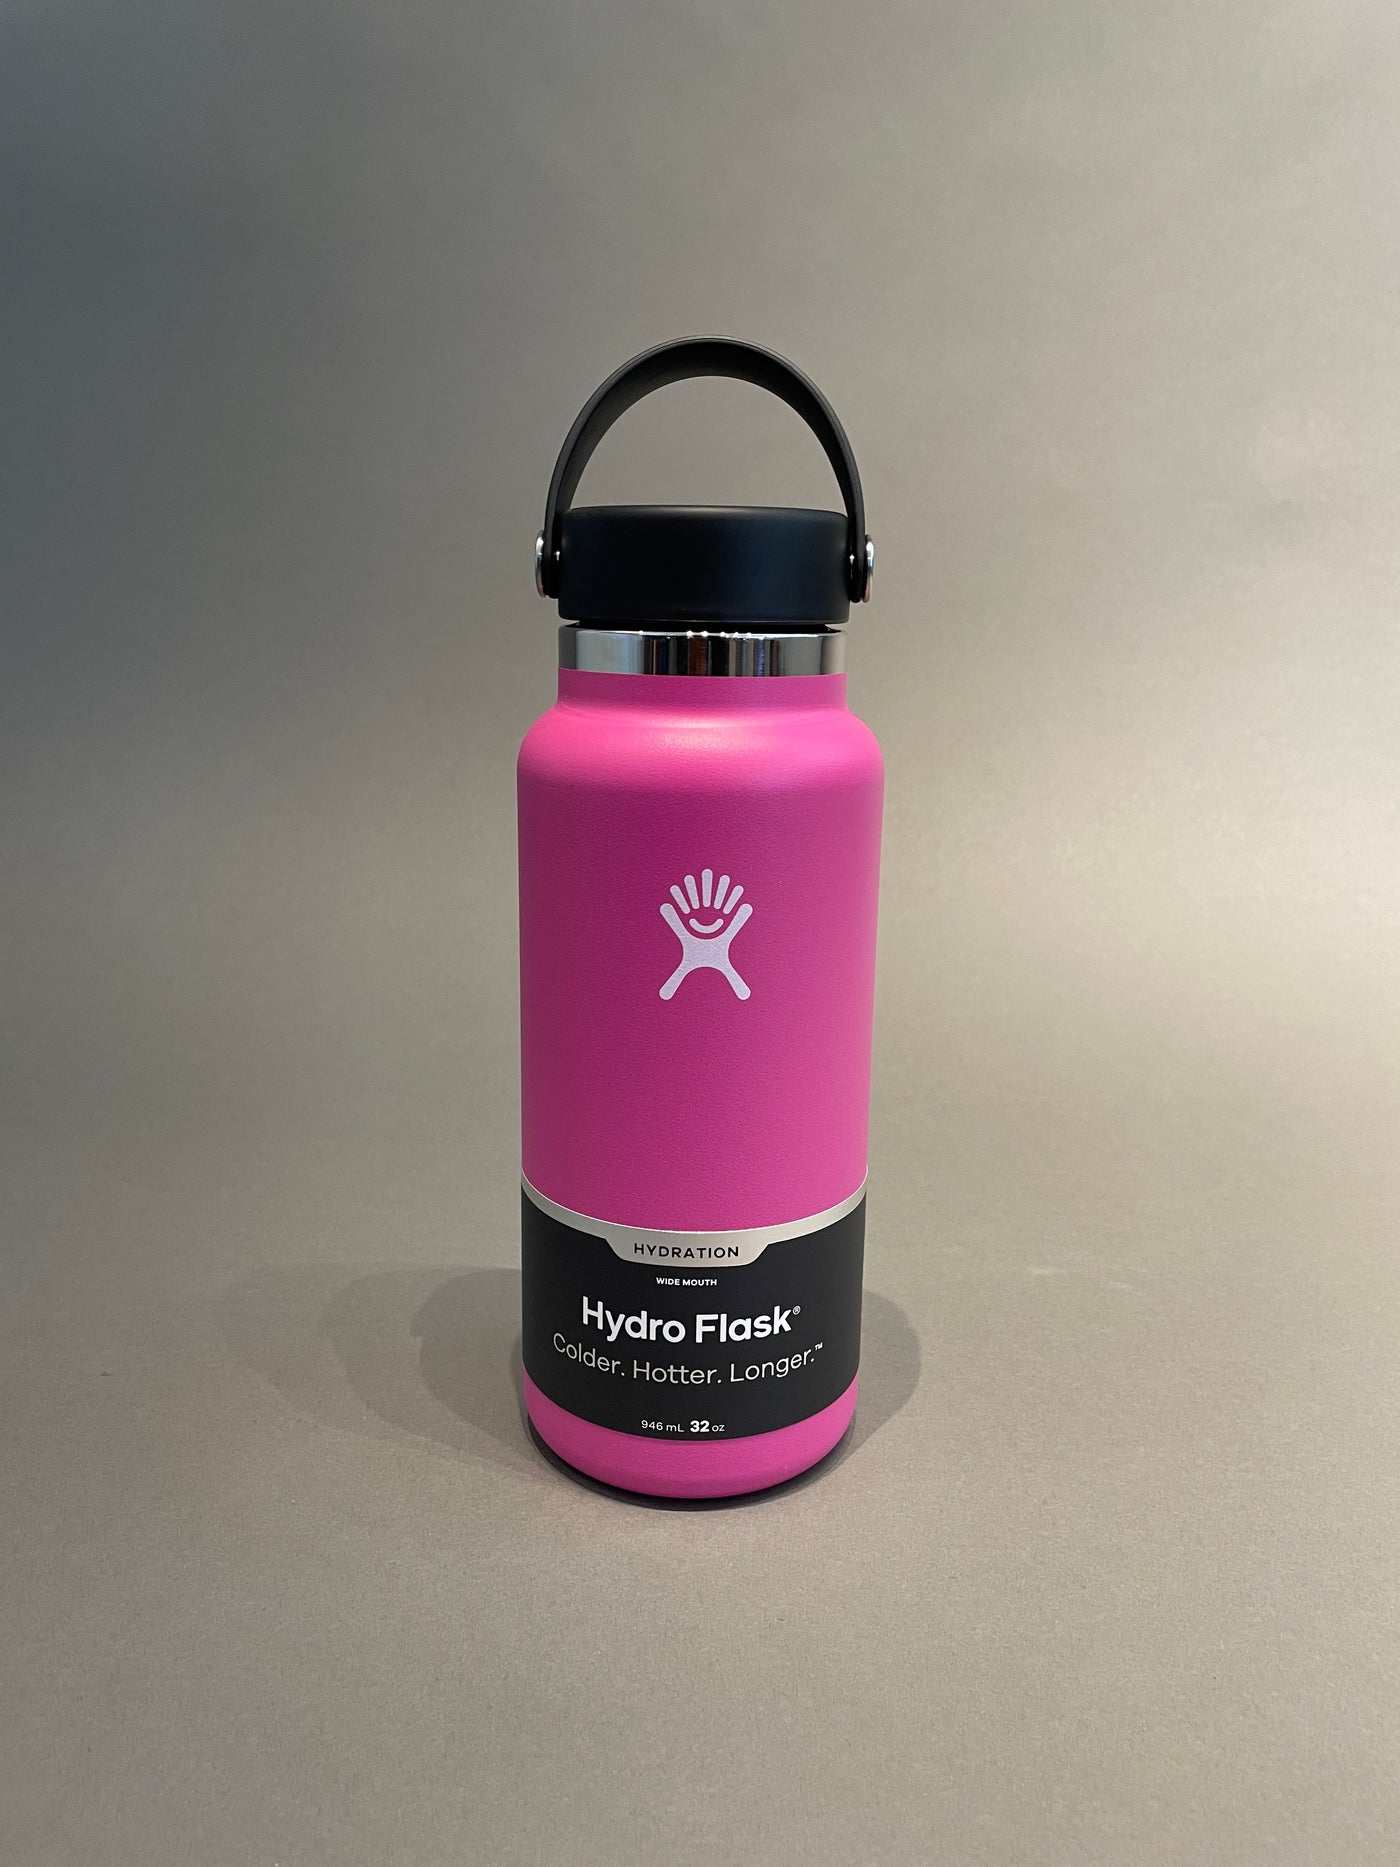 Hydro Flask, Other, Hydroflask 4 Oz Travel Tumbler